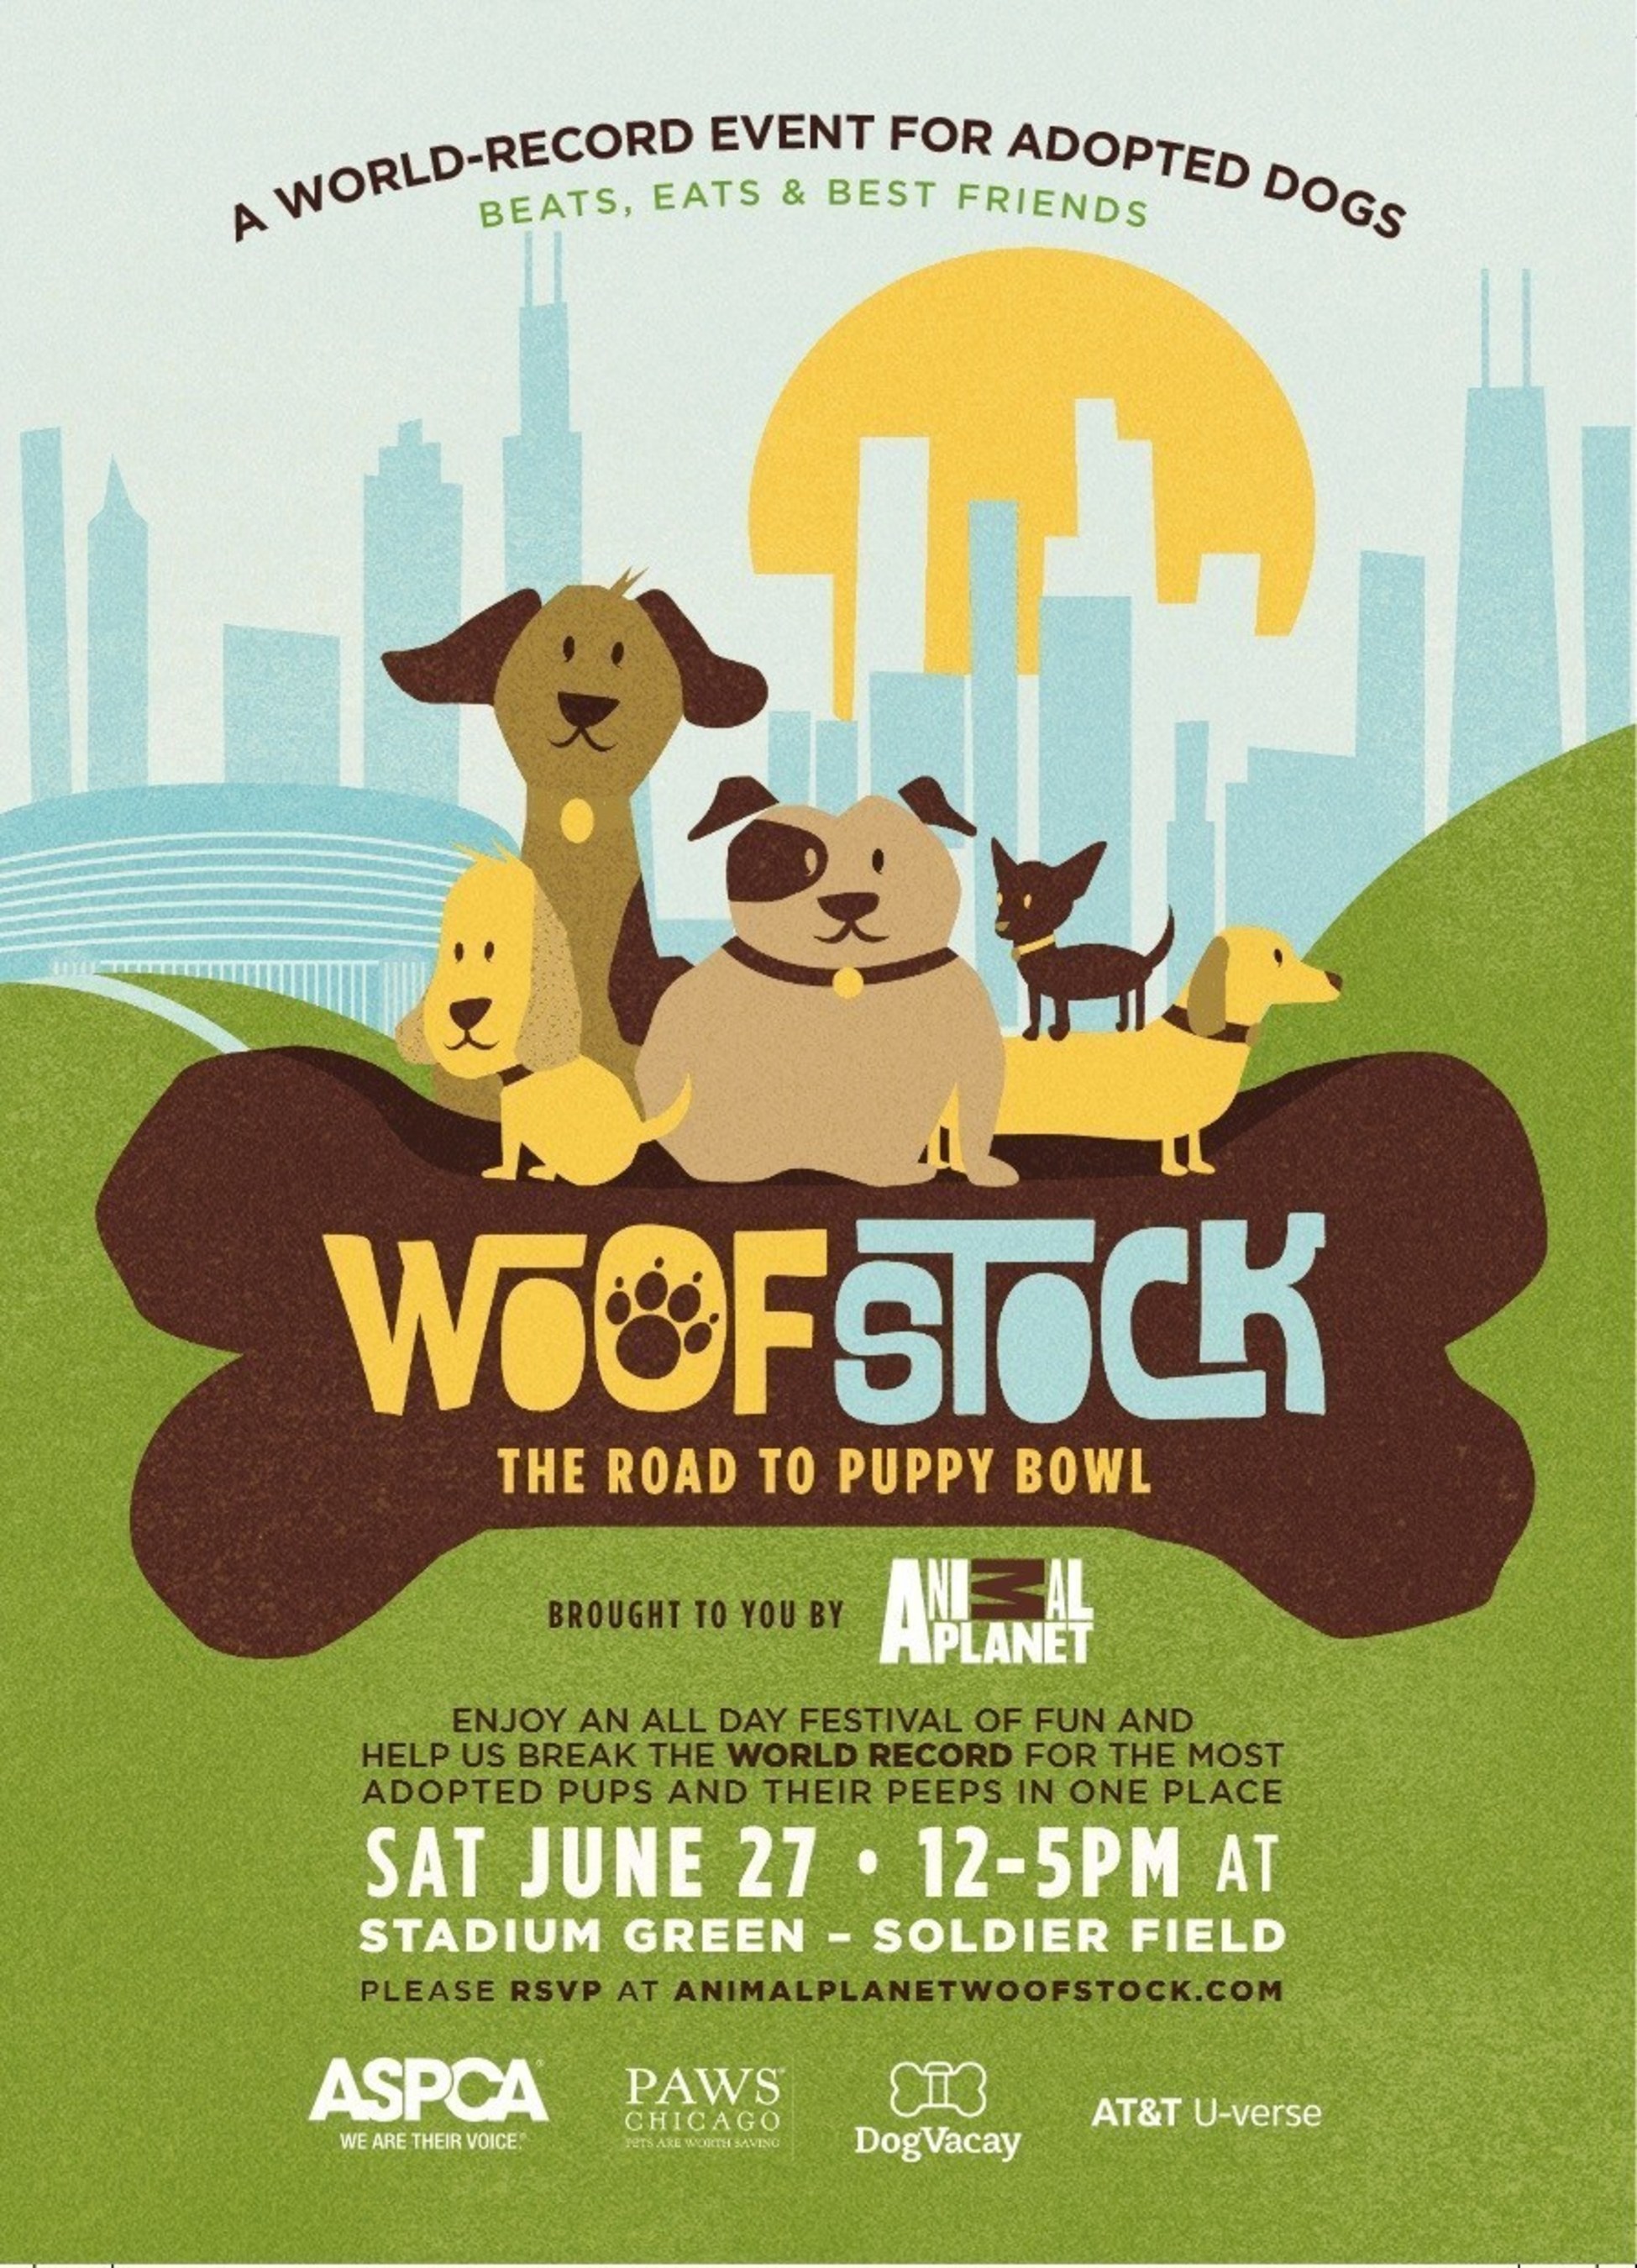 Join Animal Planet's WOOFSTOCK: ROAD TO PUPPY BOWL, a free all-day festival on June 27 in Chicago to celebrate pet adoption and set a Guinness World Record